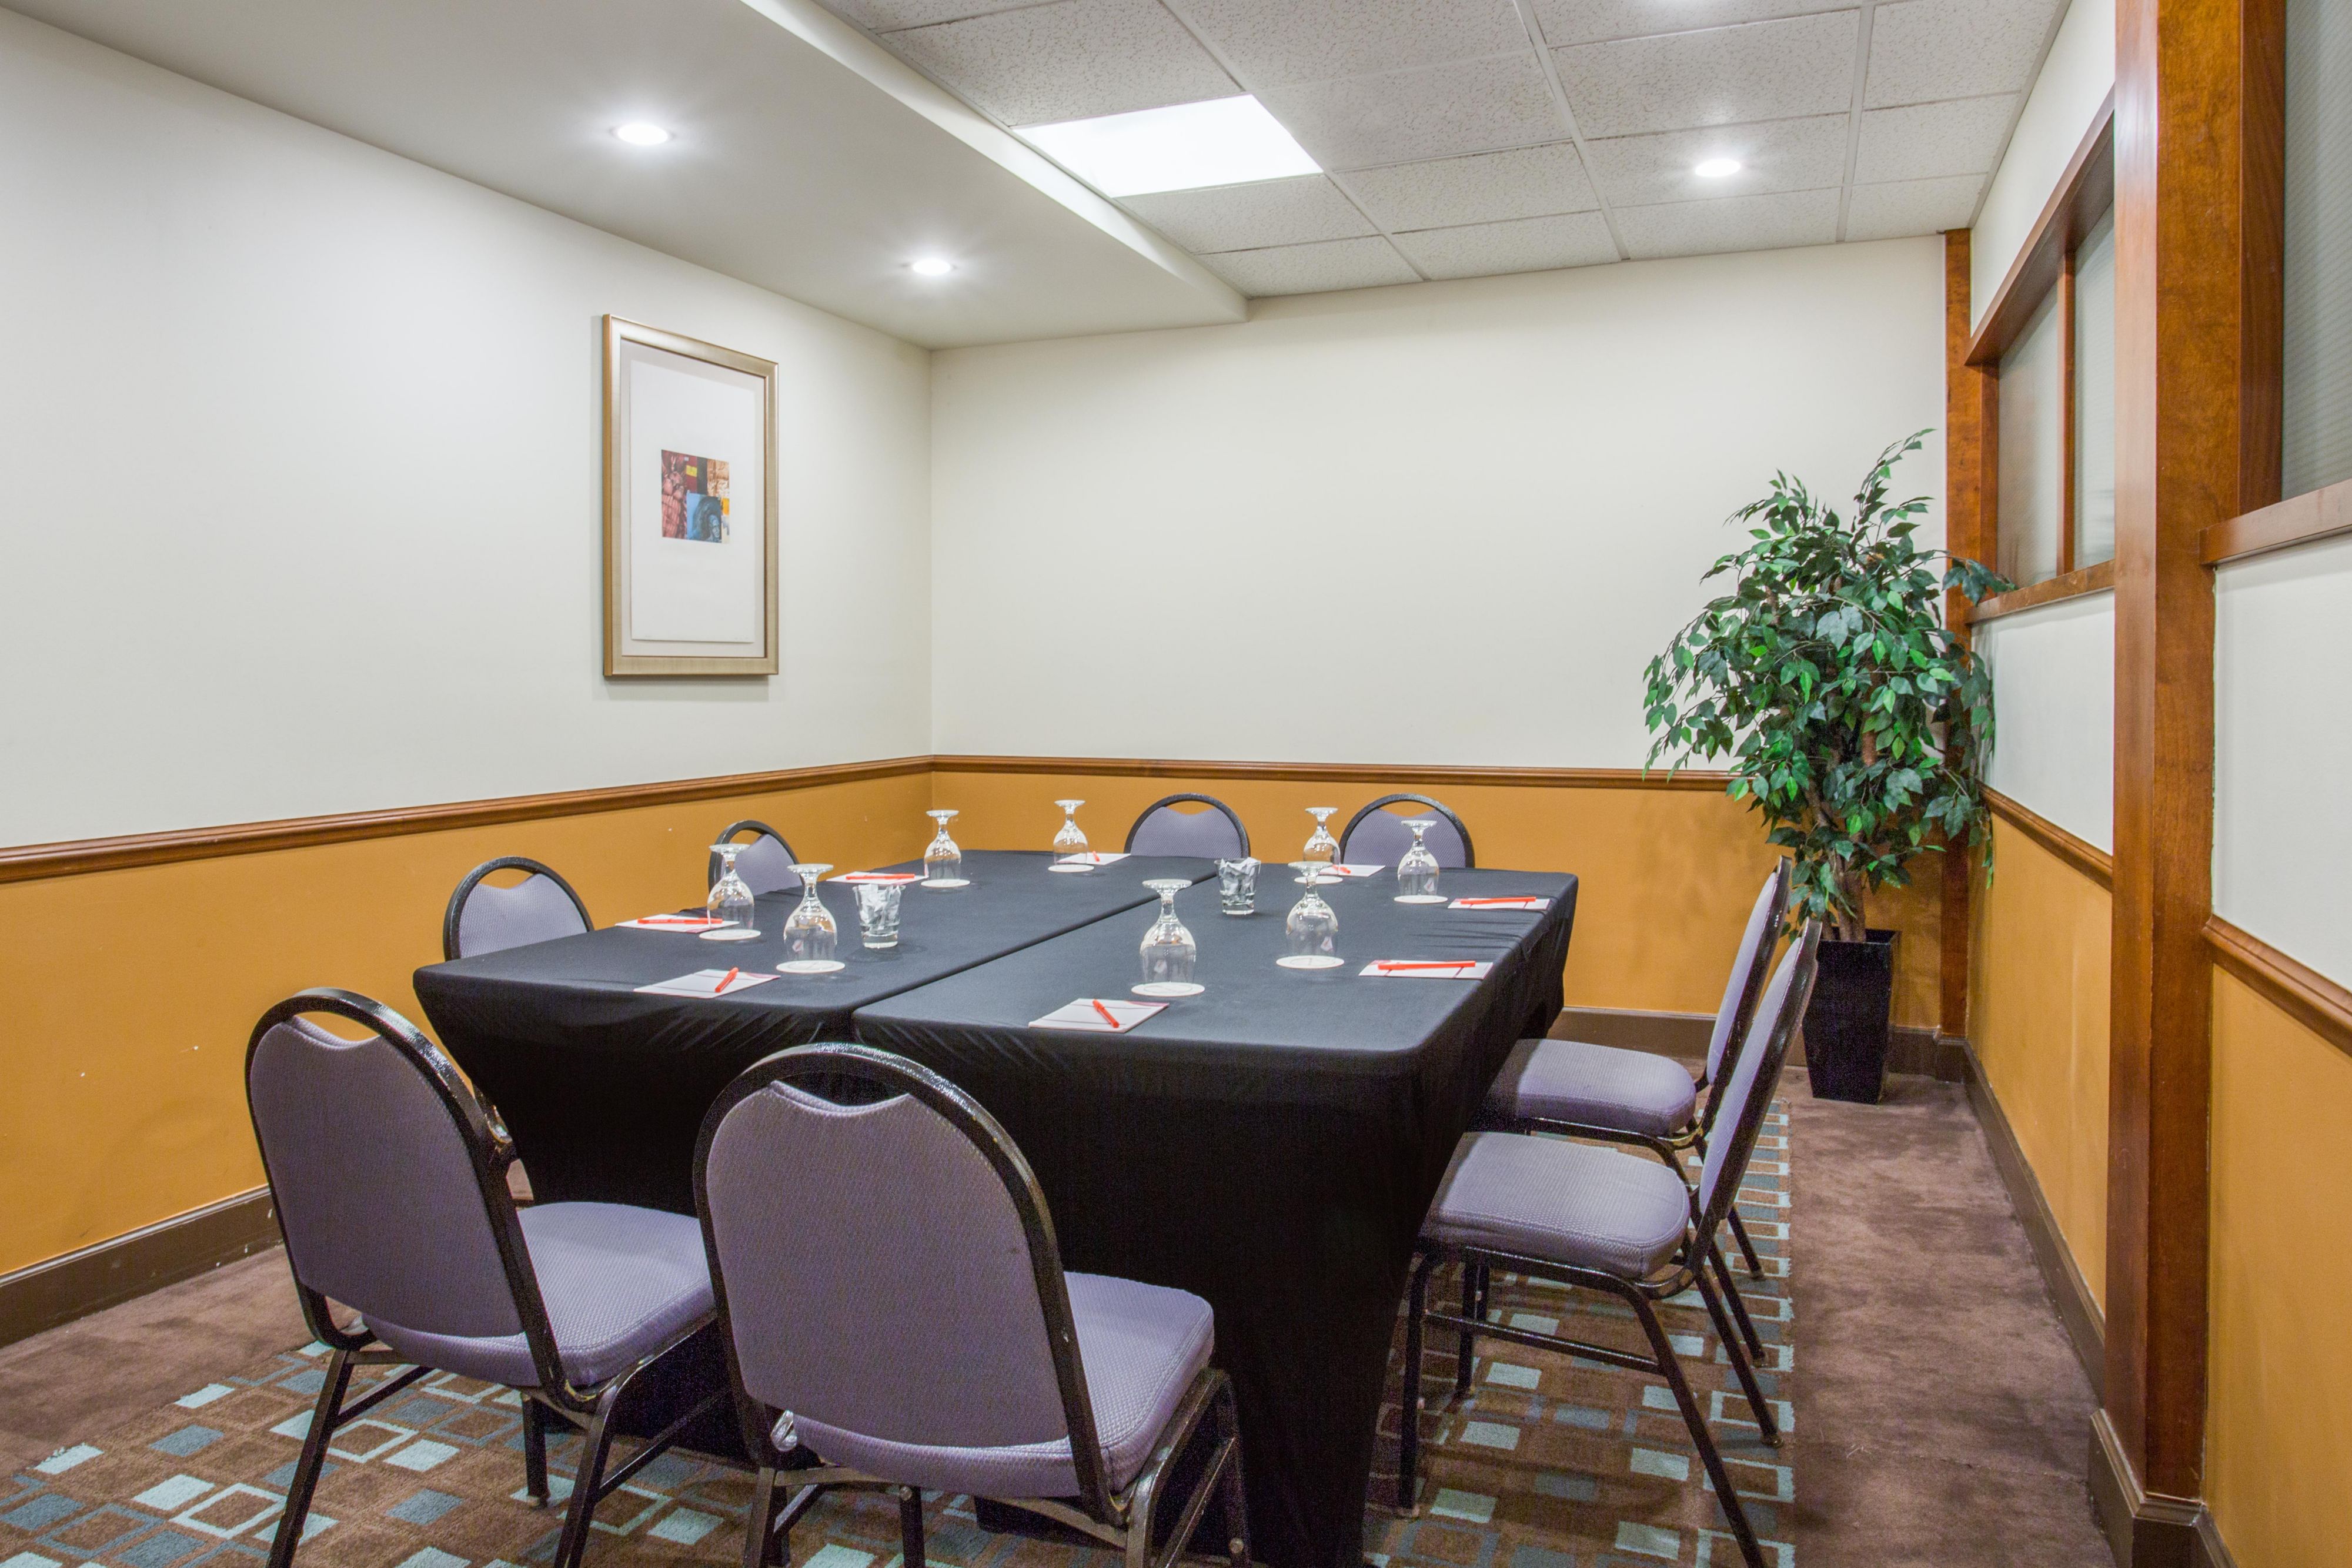 Plan small meetings at the Crowne Plaza Orlando Downtown